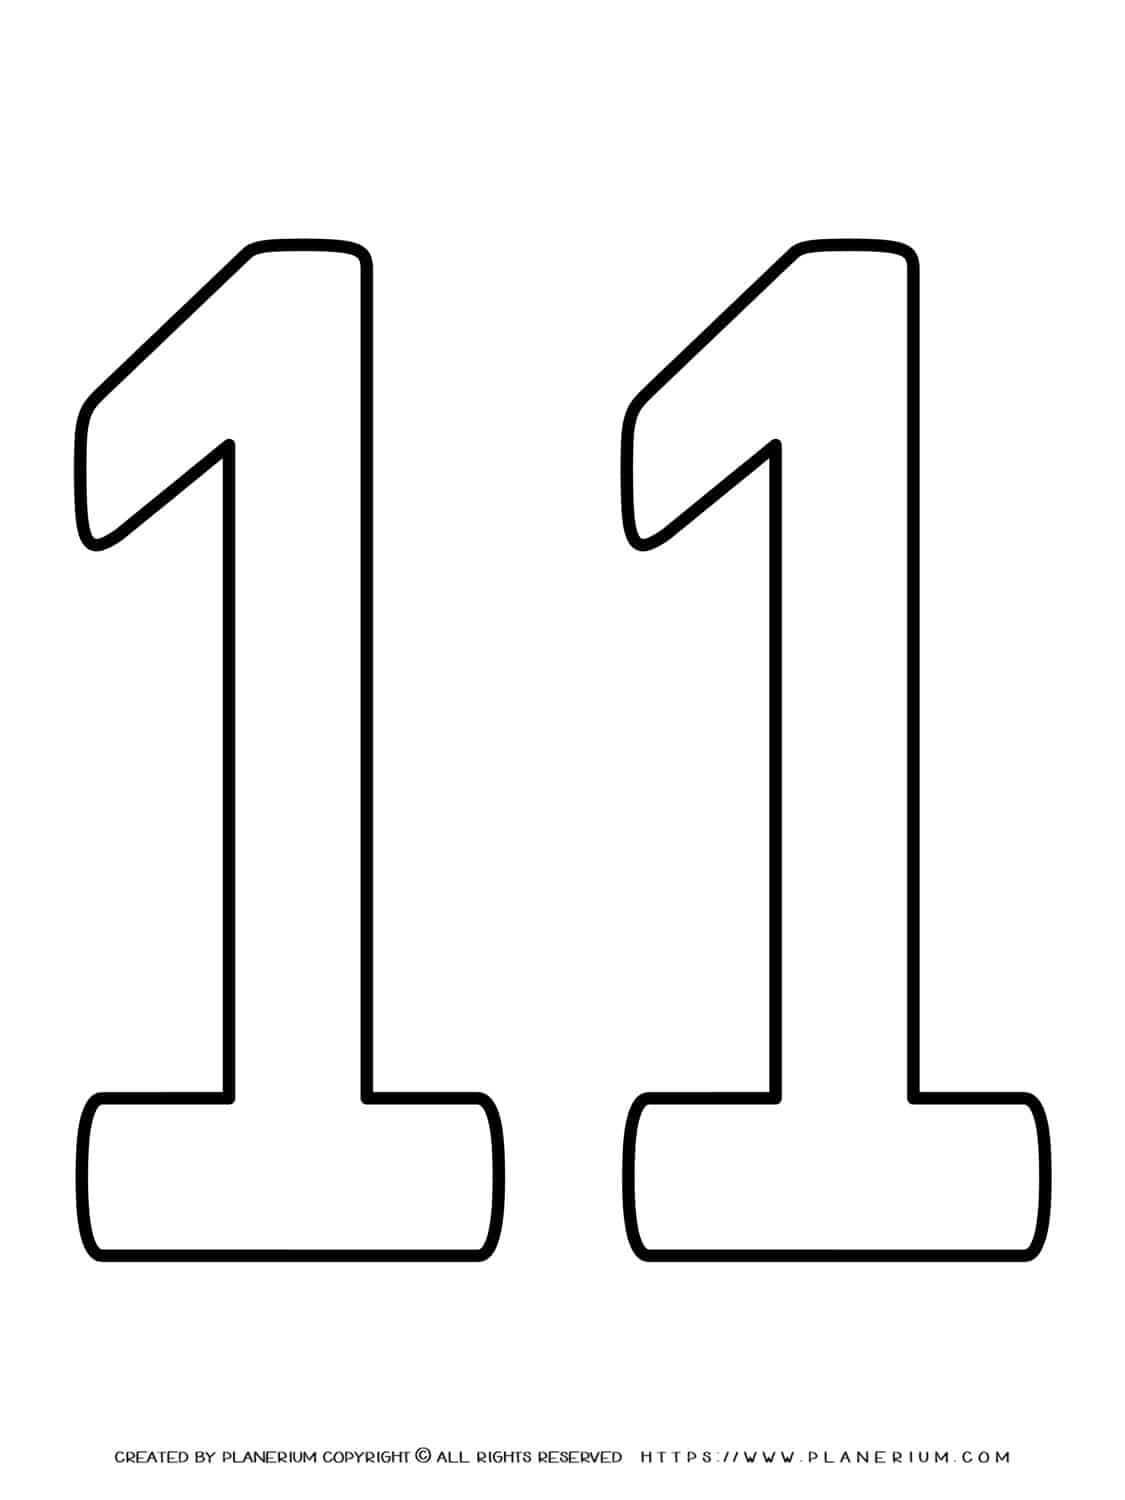 number 11 clipart black and white